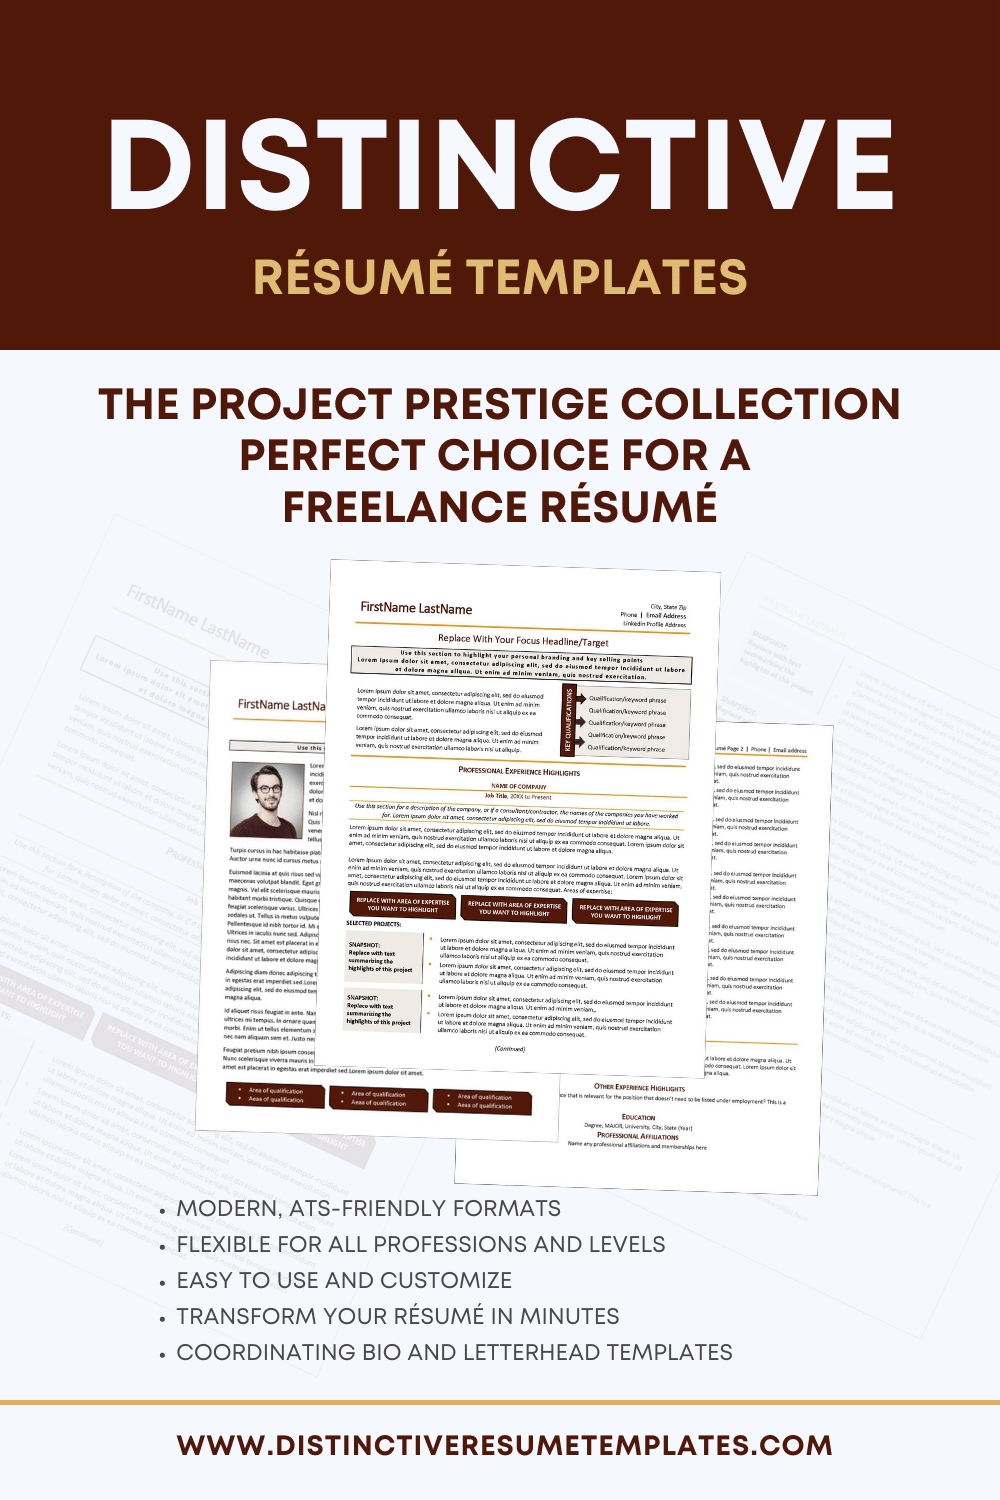 #1 Best Project Manager Freelance Resume Template